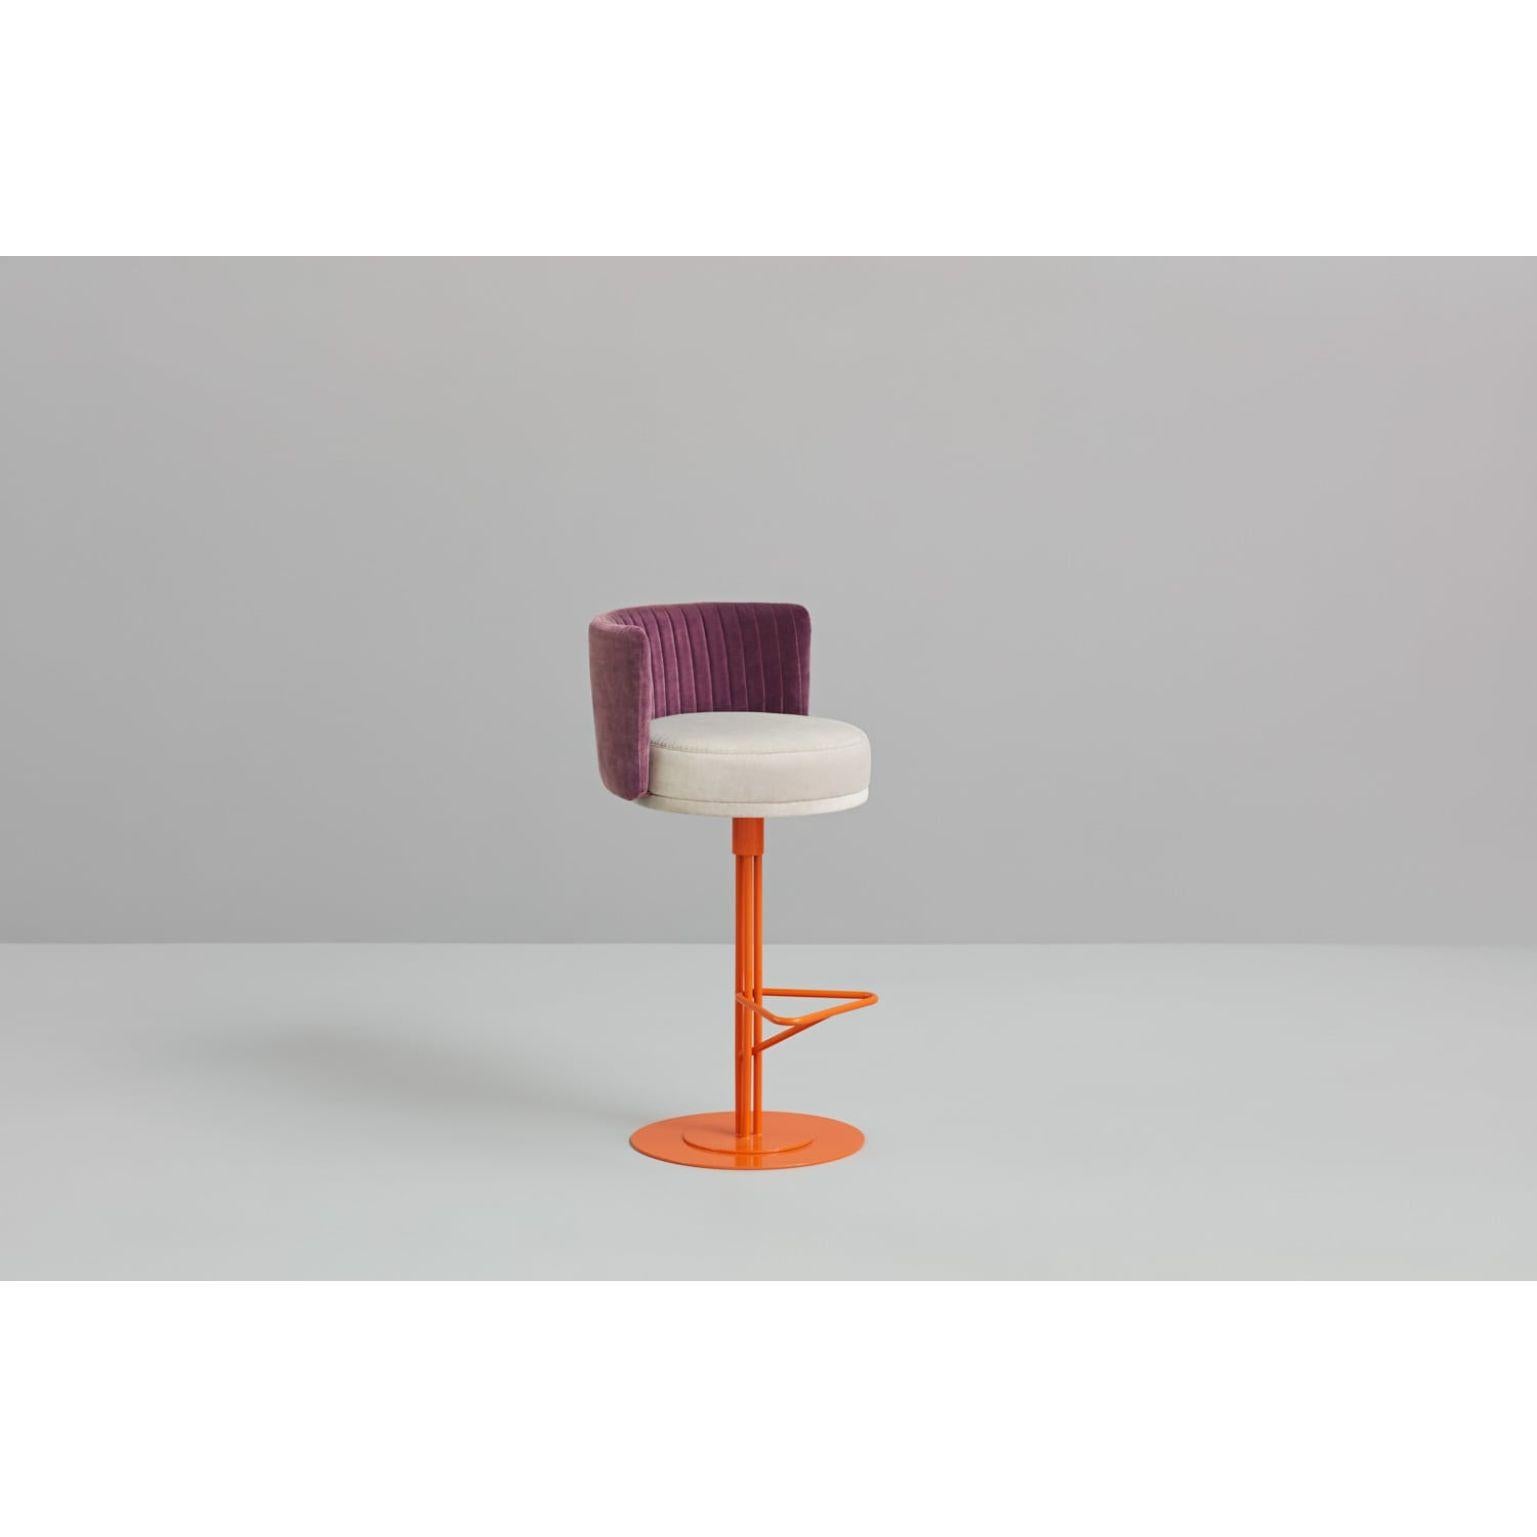 3 Colored Athens stool by Pepe Albargues
Dimensions: W52, D55, H101, Seat 80
Materials: Iron structure and seat particles board
Foam CMHR (high resilience and flame retardant) for all our cushion filling systems
Painted iron structure

Also